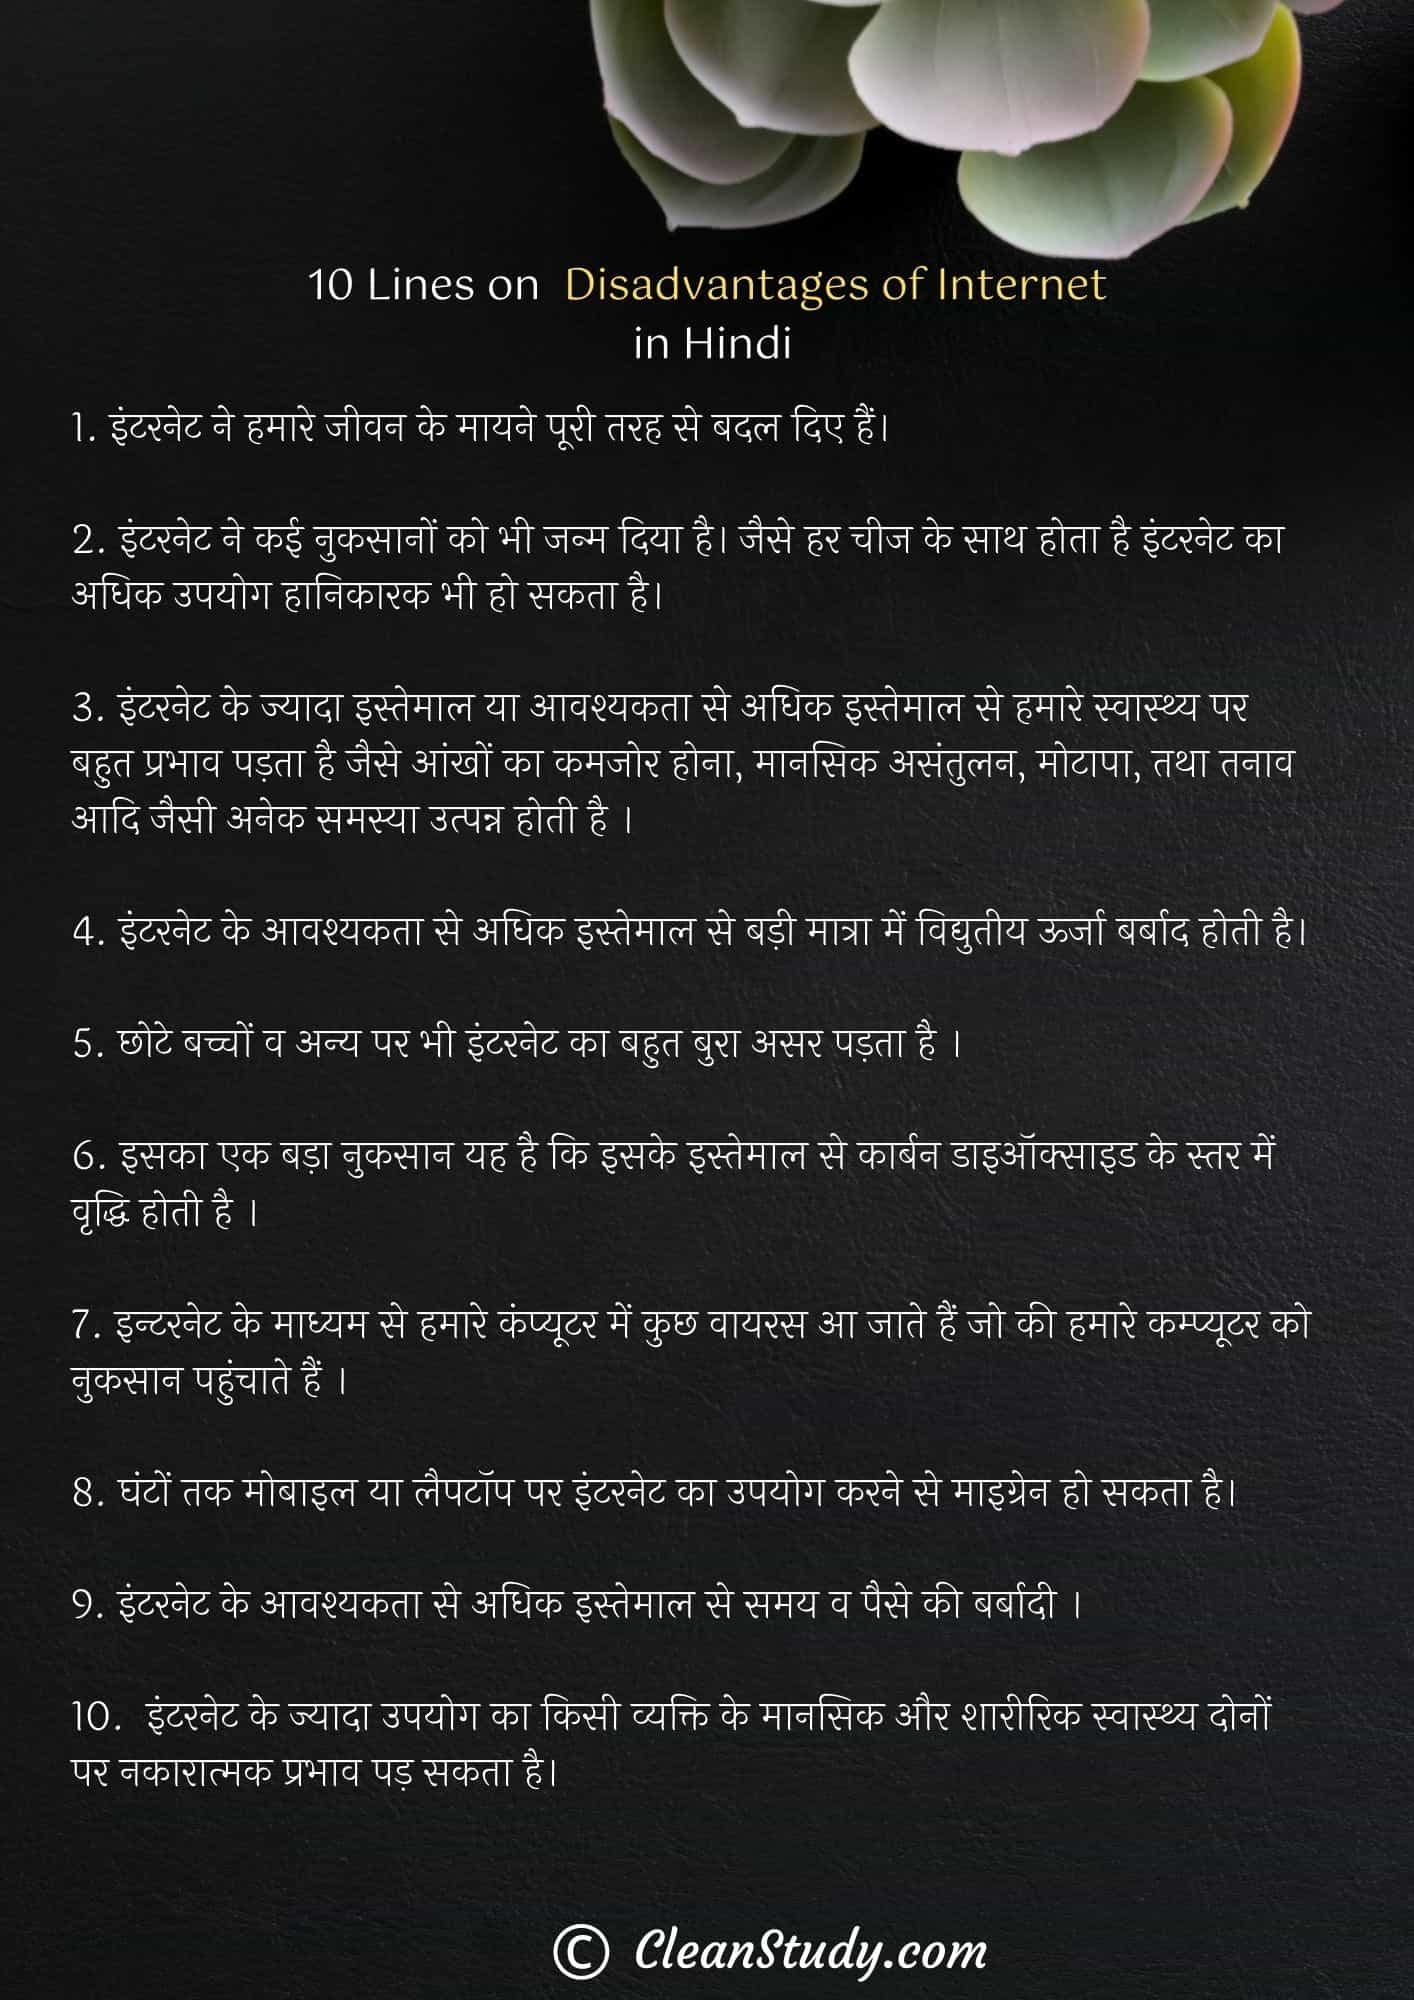 10 Lines on Disadvantages of Internet in Hindi